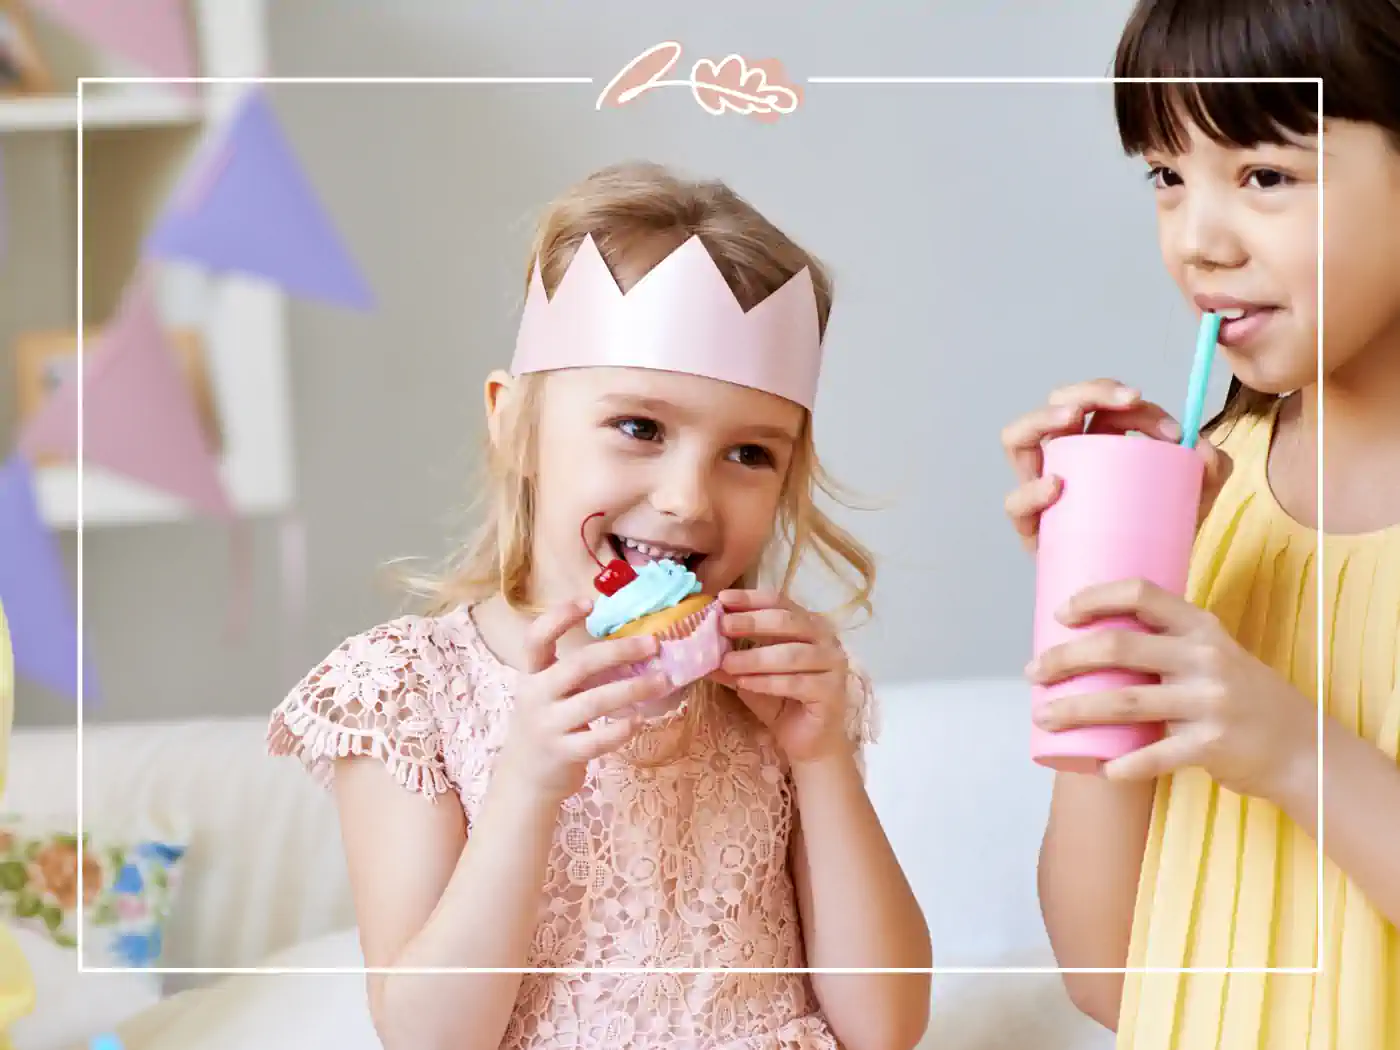 Two young girls enjoying cupcakes and drinks at a birthday party, one wearing a pink paper crown. Fabulous Flowers and Gifts - Birthday Collection.